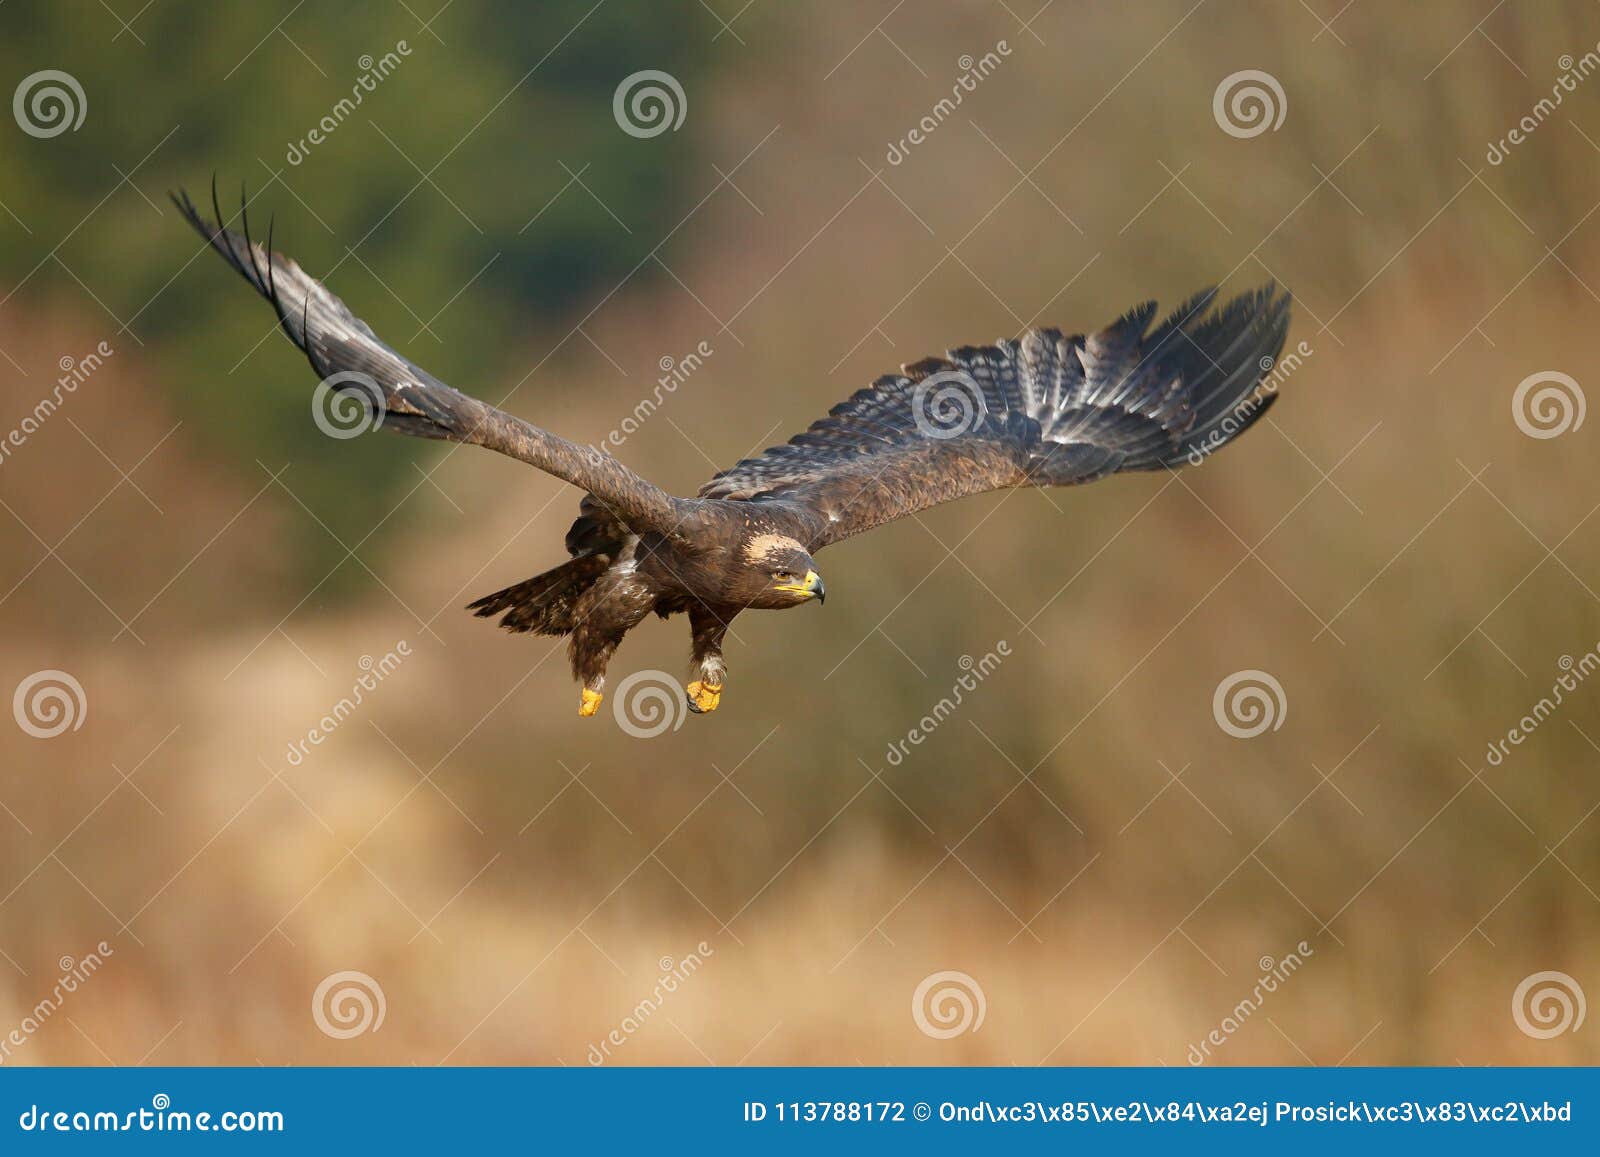 flying dark brawn bird of prey steppe eagle, aquila nipalensis, with large wingspan. wildlife scene from nature. action fly scene